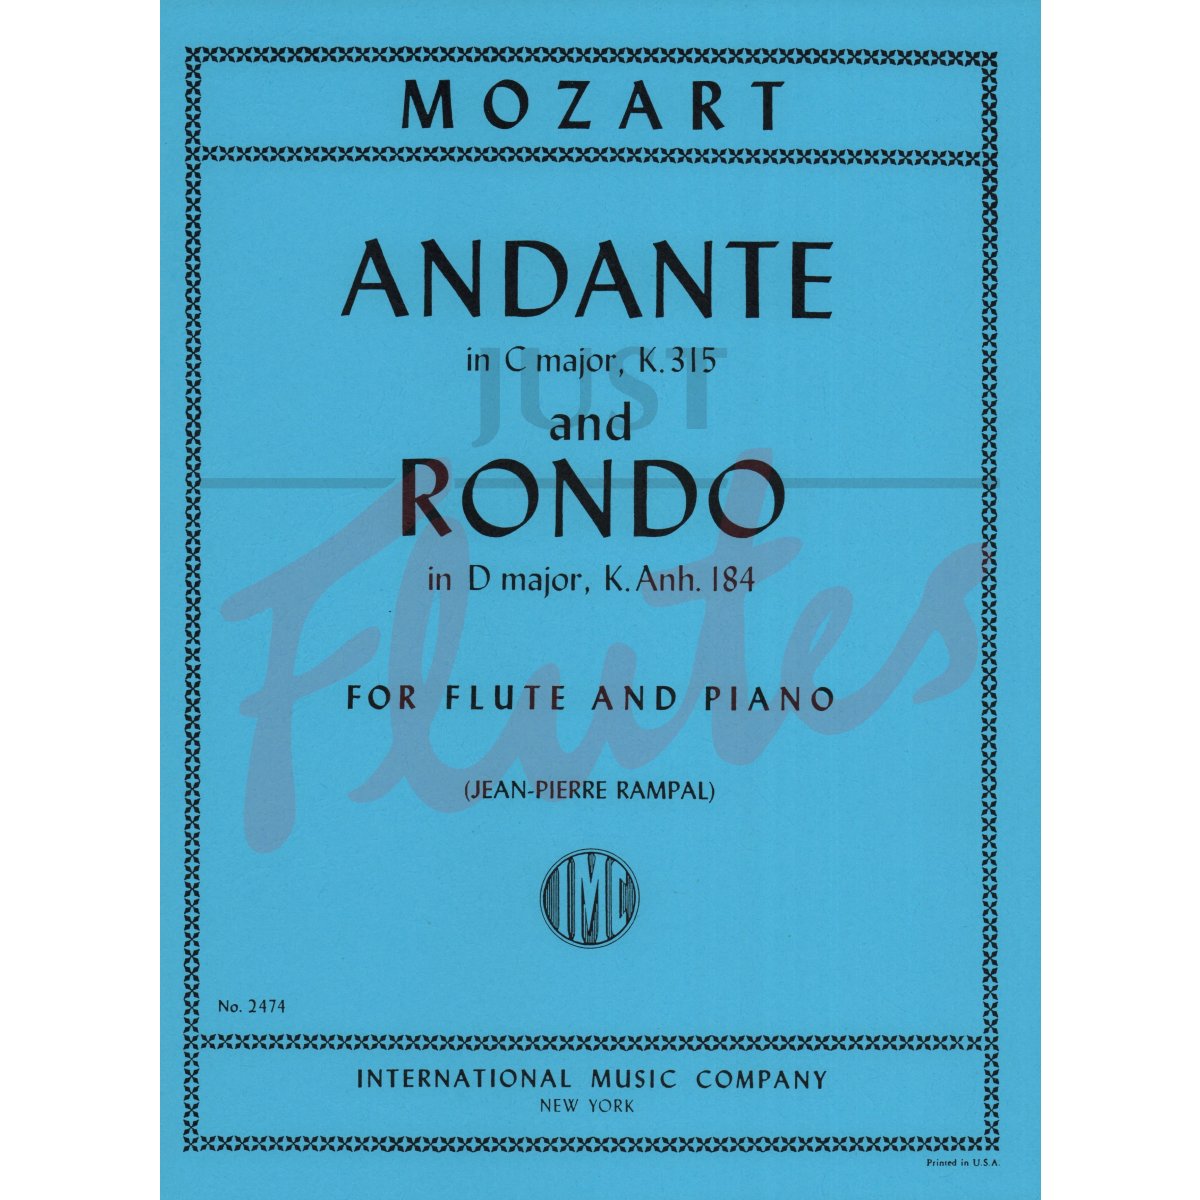 Andante in C major KV315 and Rondo in D major KV184 for Flute and Piano